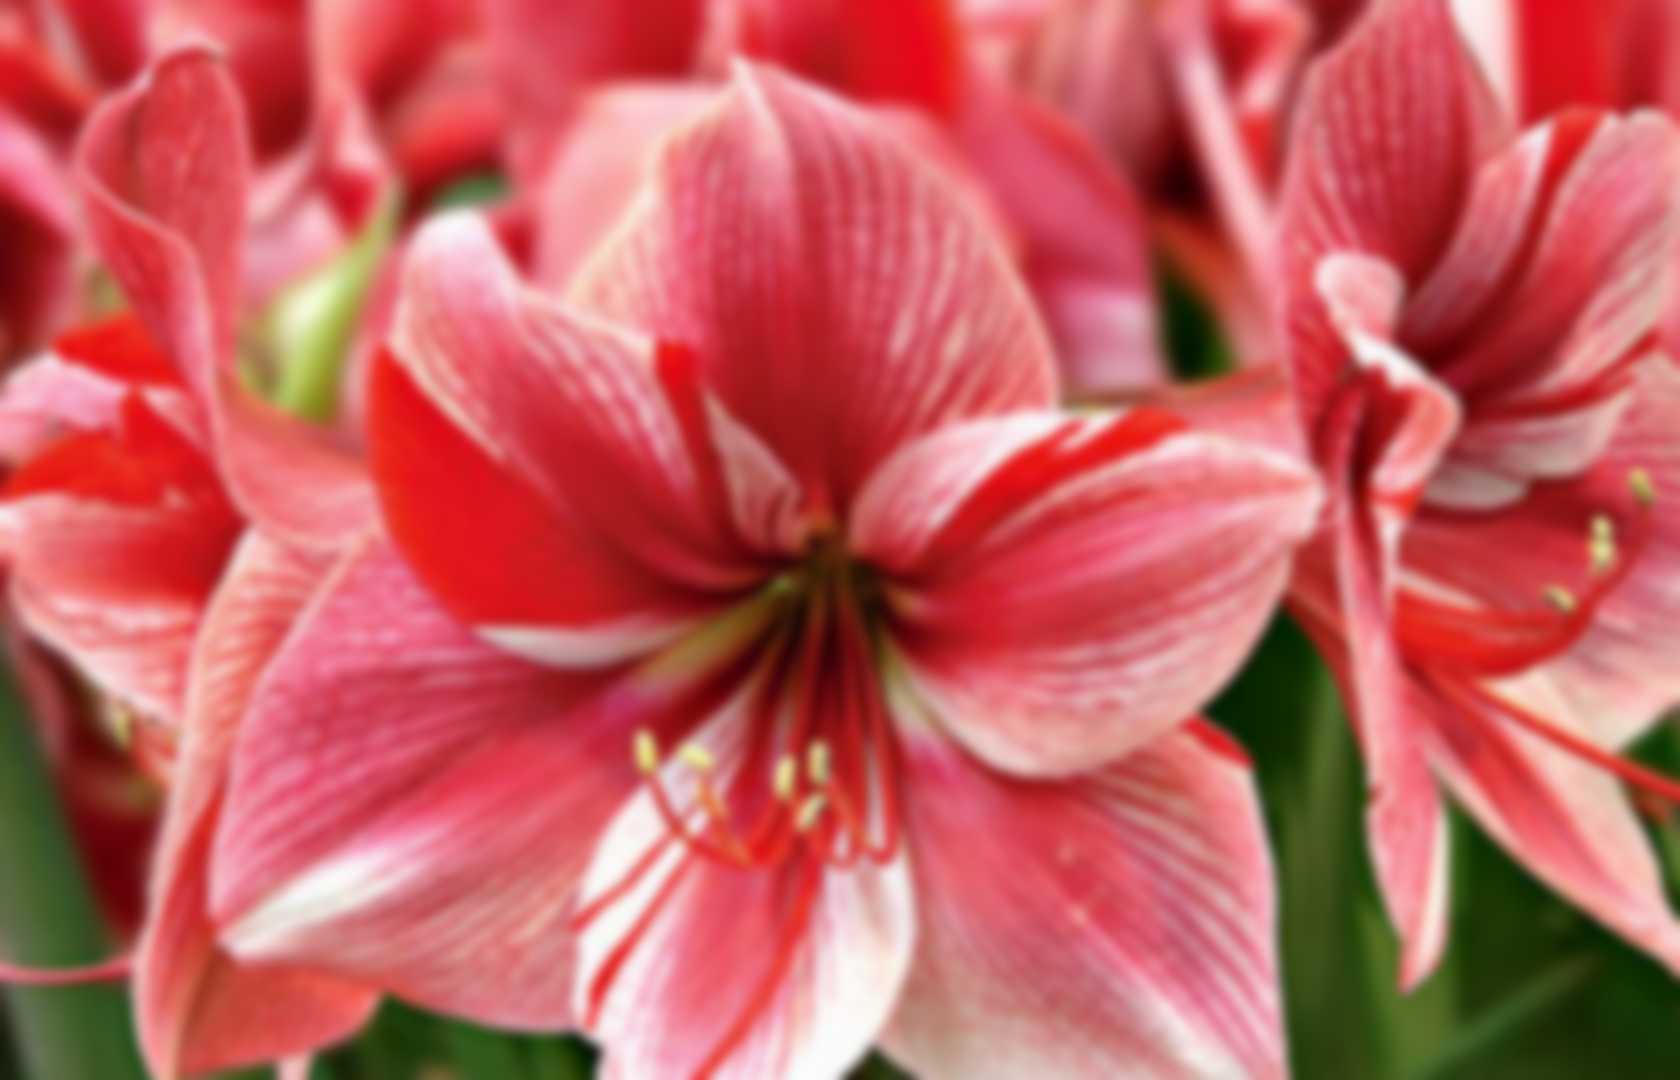 how do you spell amaryllis flower